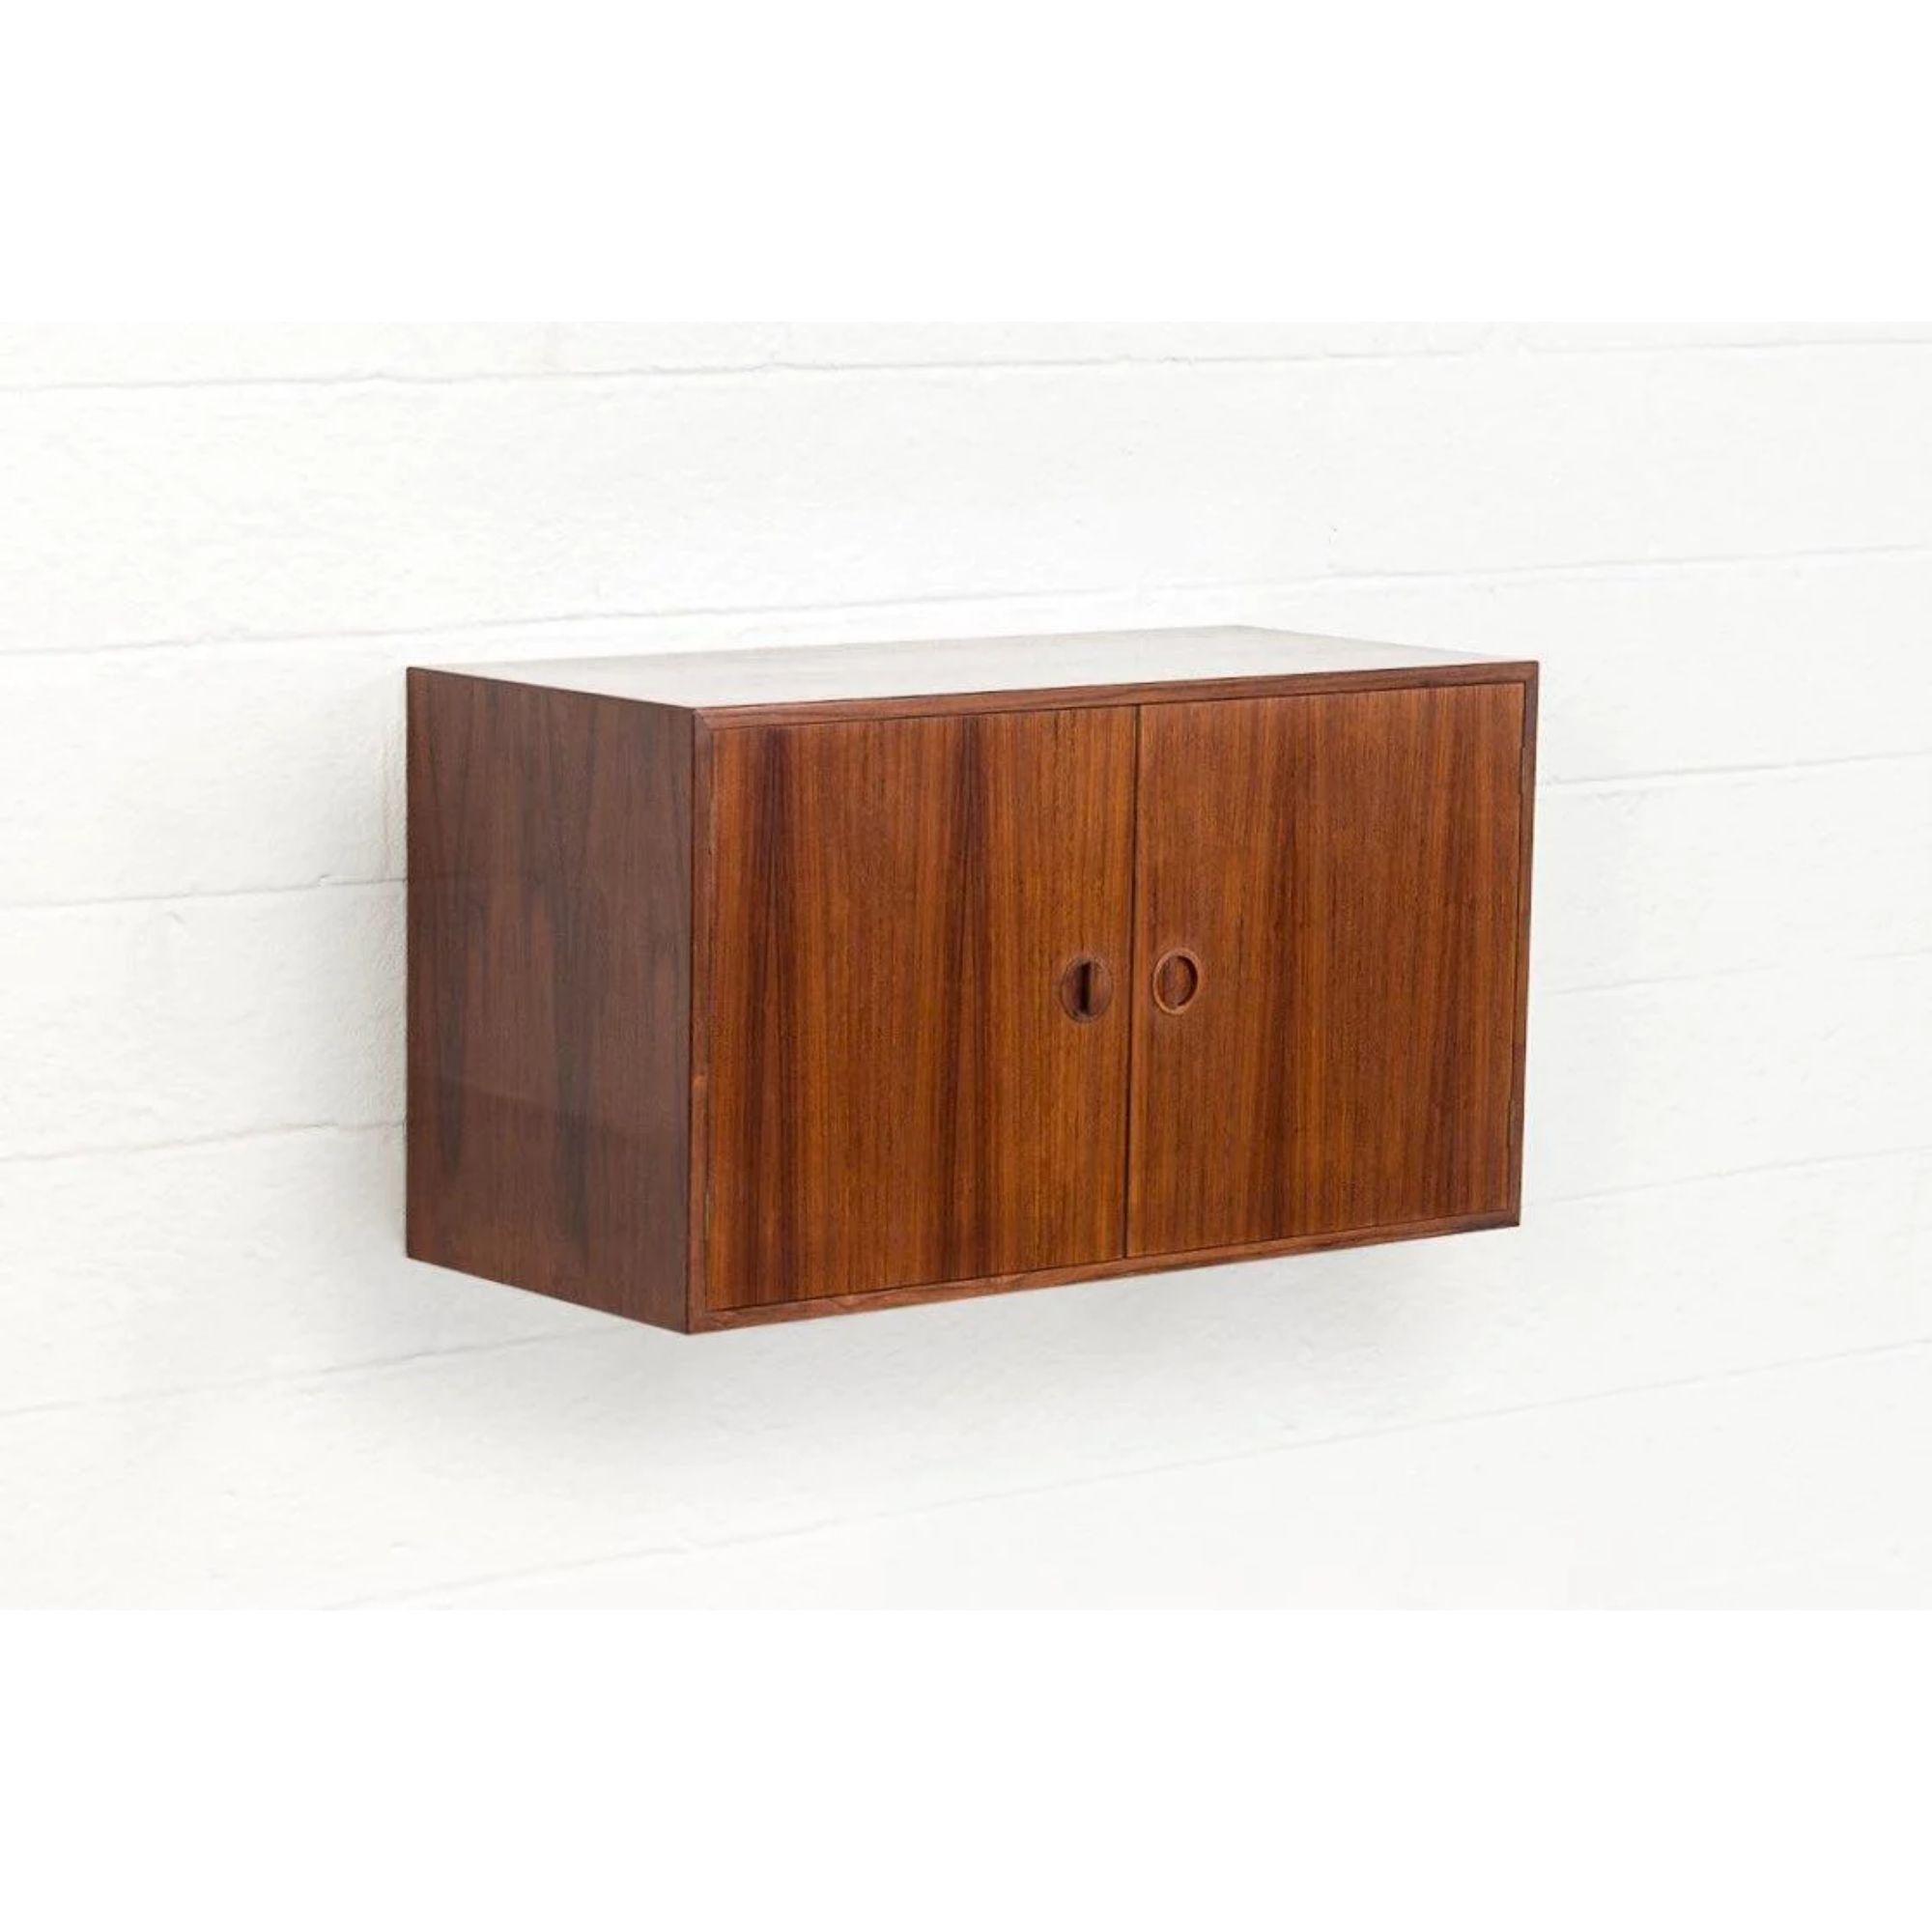 This vintage Mid-Century Modern Hansen & Guldborg wall-mounted cabinet, floating shelf or media console made in Denmark circa 1965 has a Classic Danish modern design with clean, Minimalist lines. Well constructed from rosewood the cabinet features